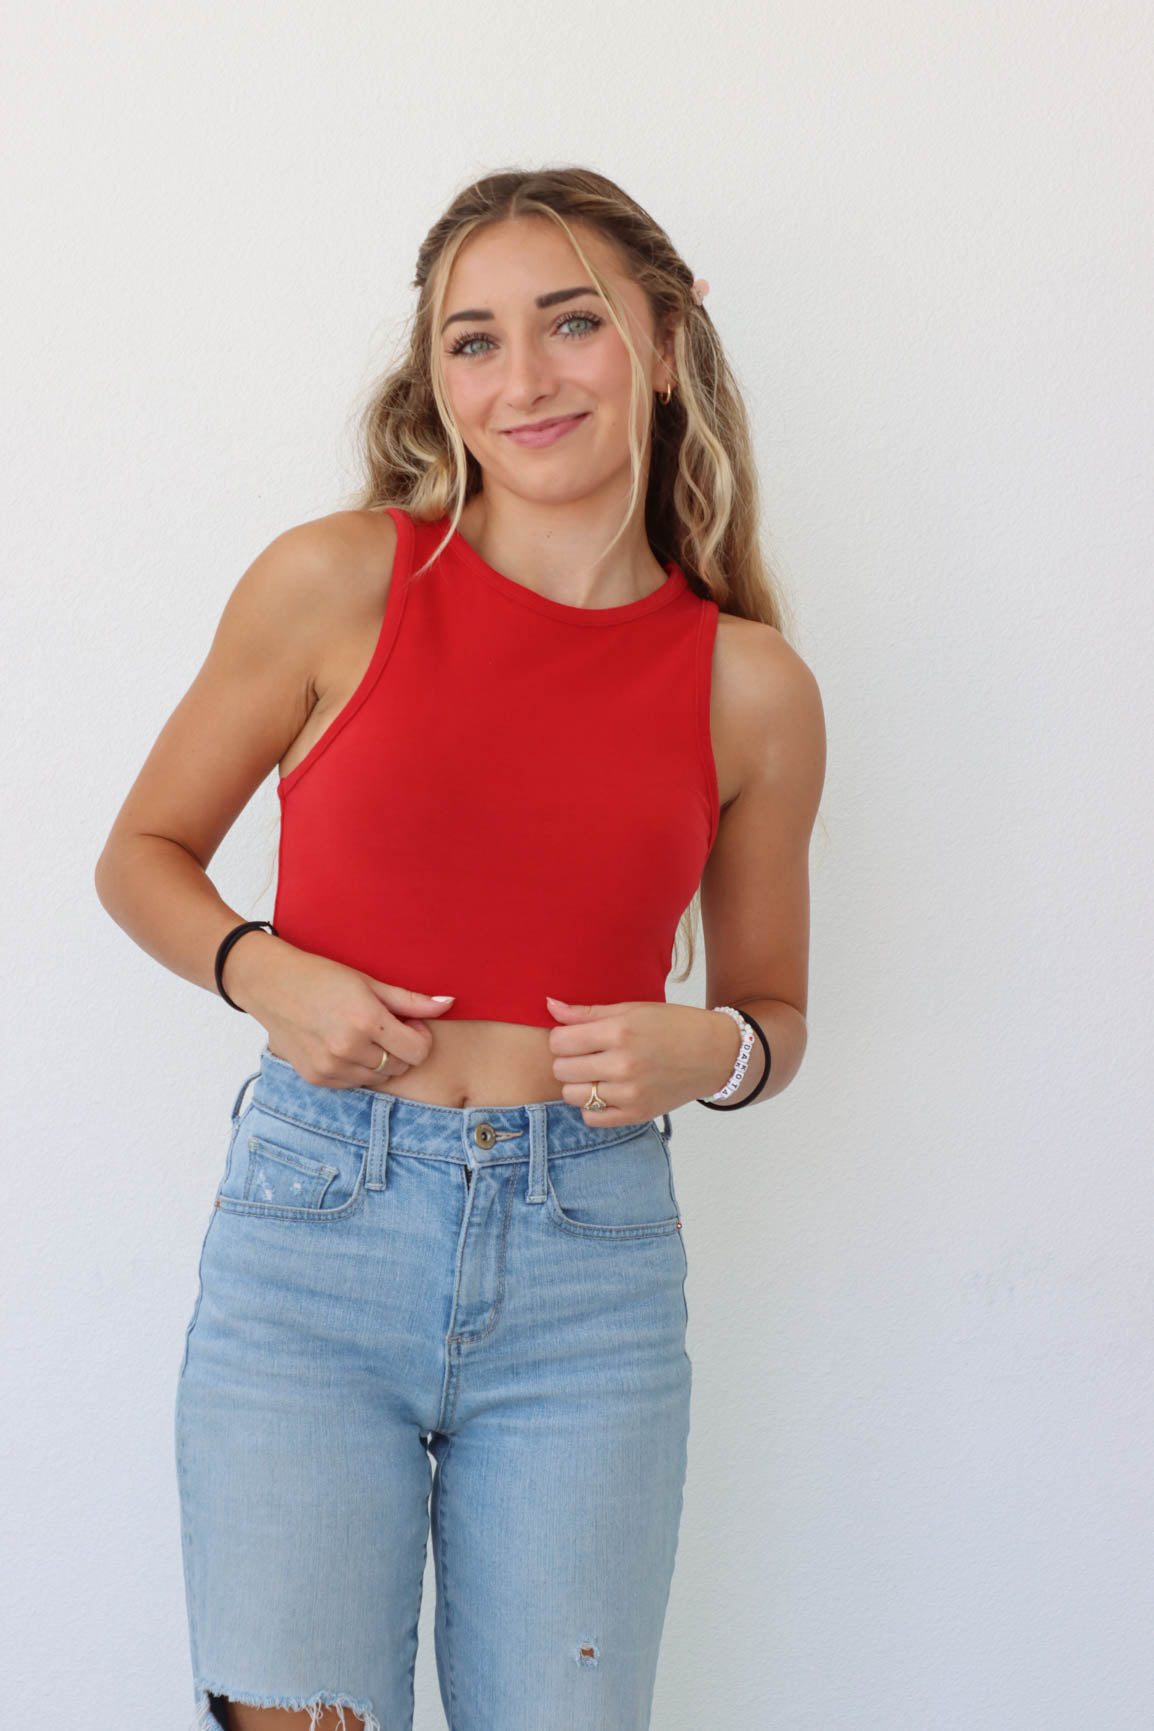 girl wearing red tank top with buckle detailing on the back